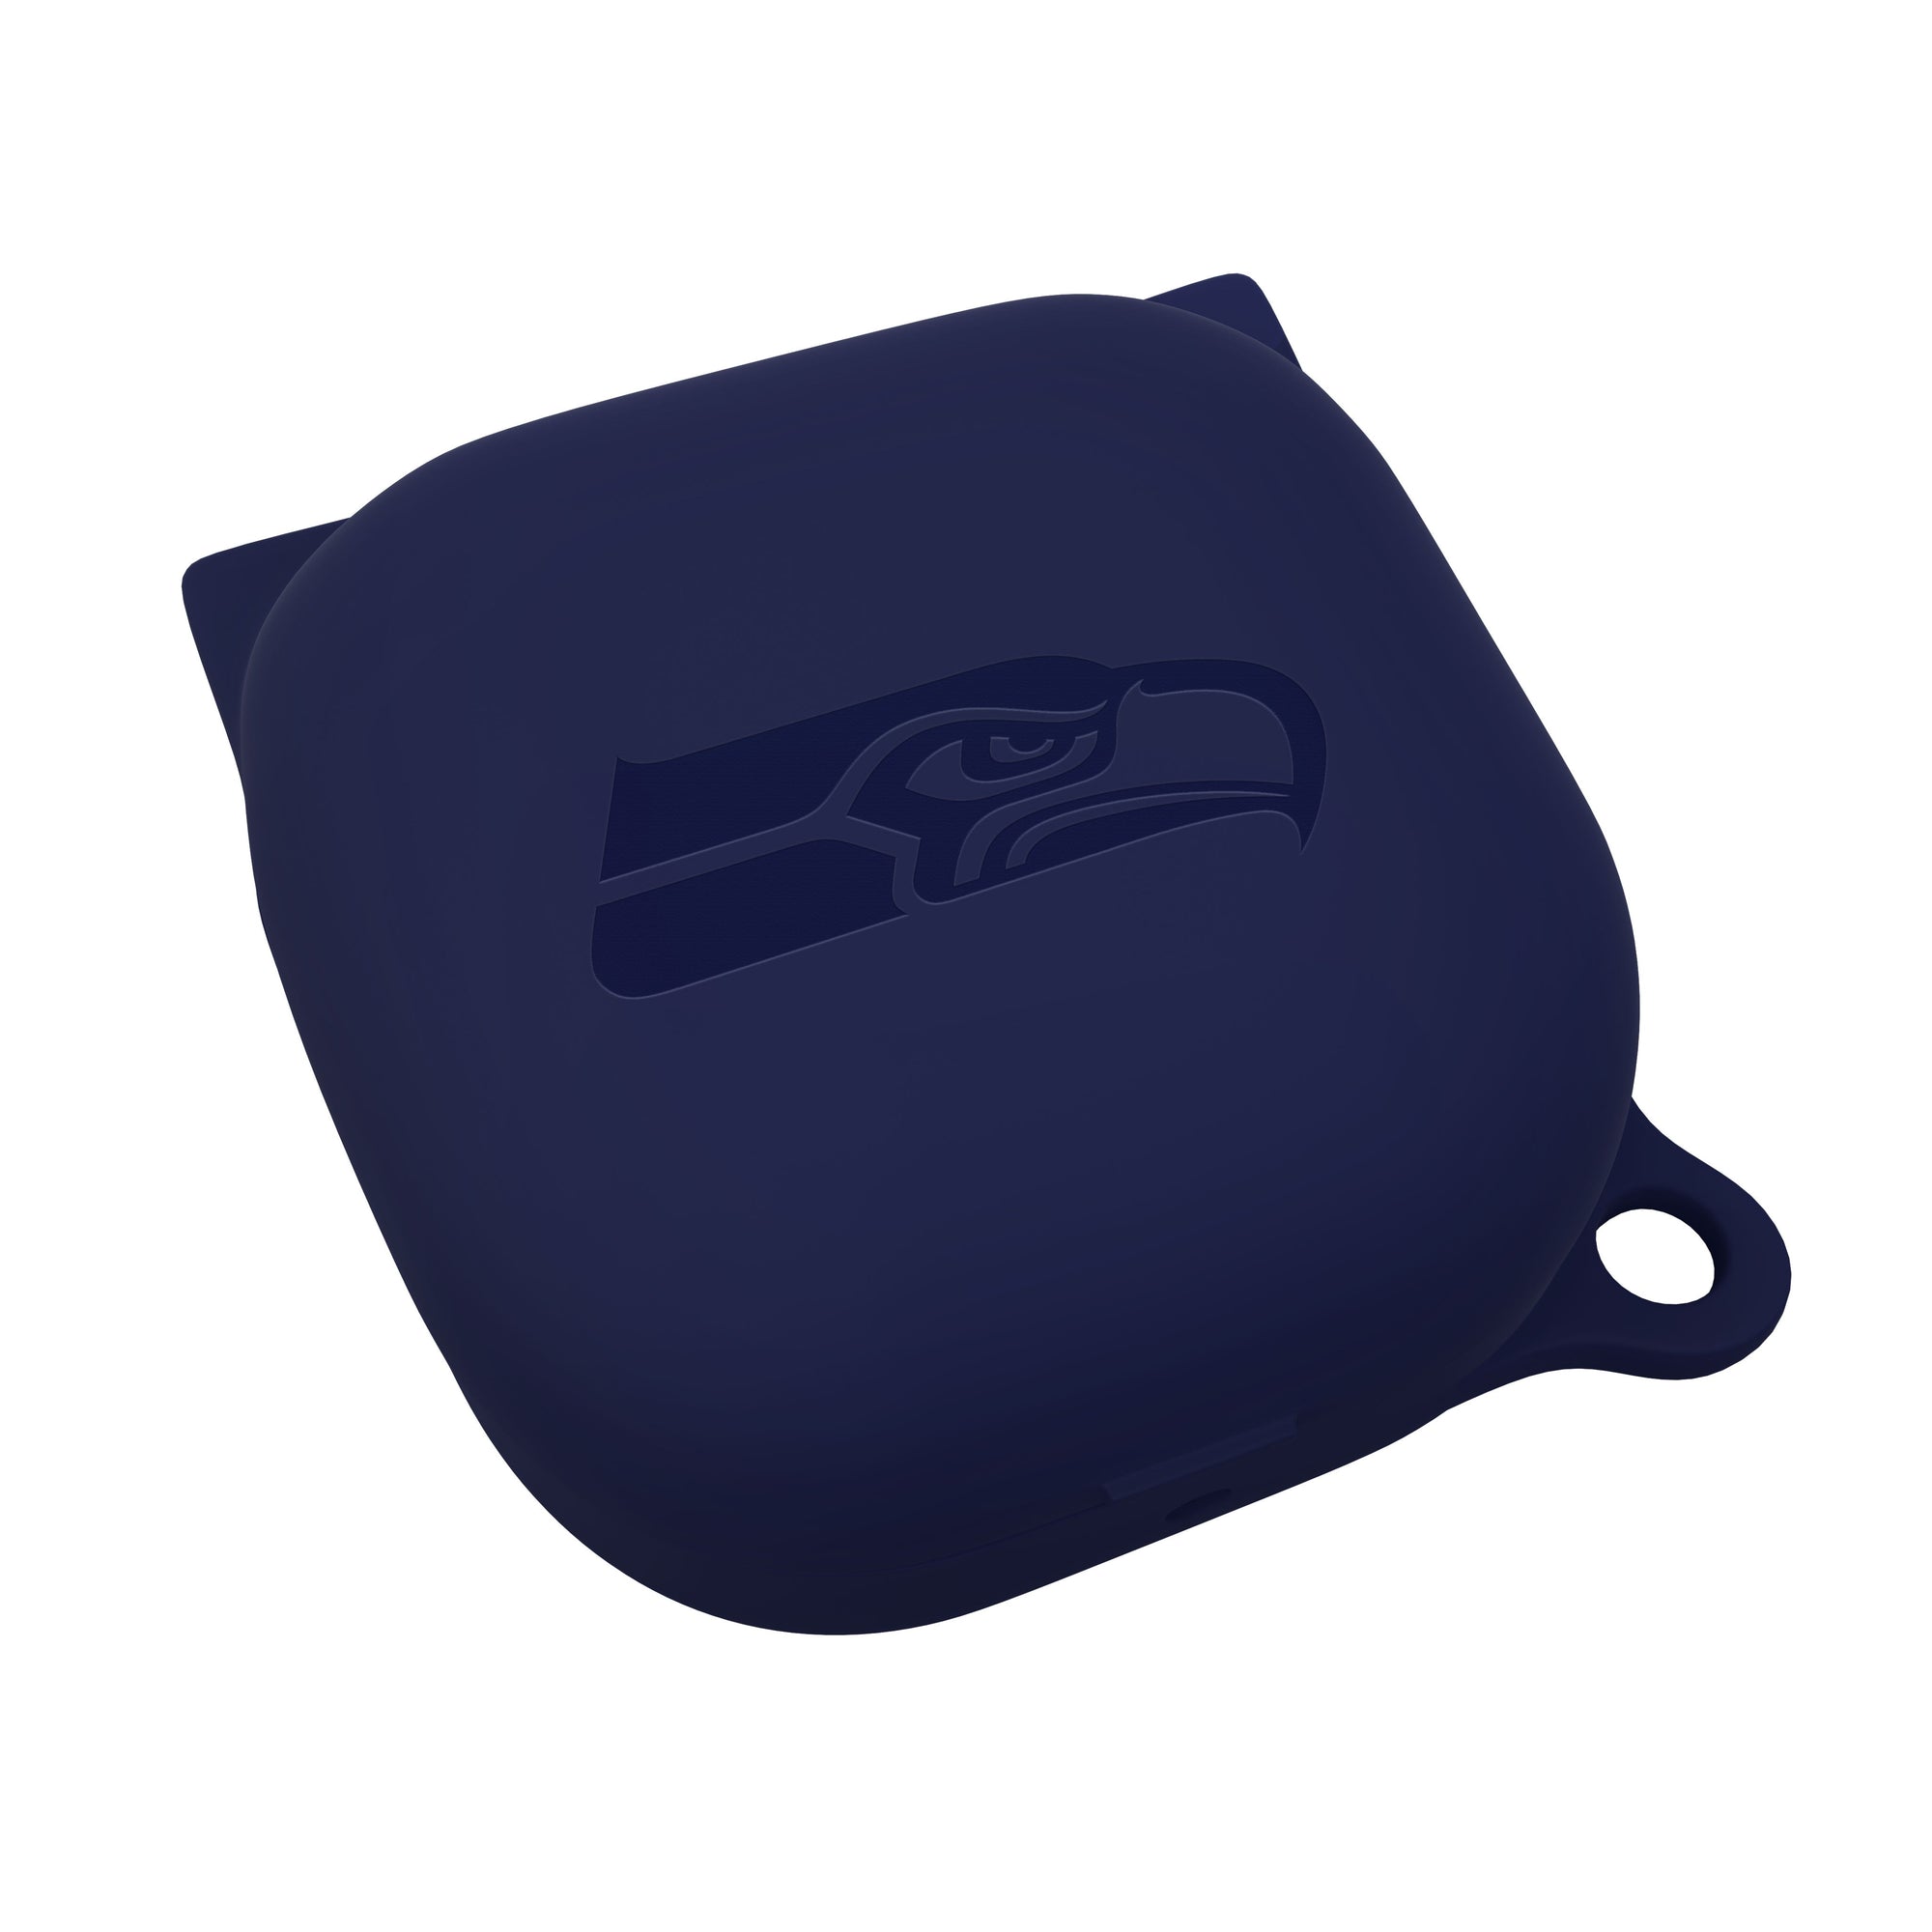 Seattle Seahawks Engraved Samsung Buds Pro Case Cover